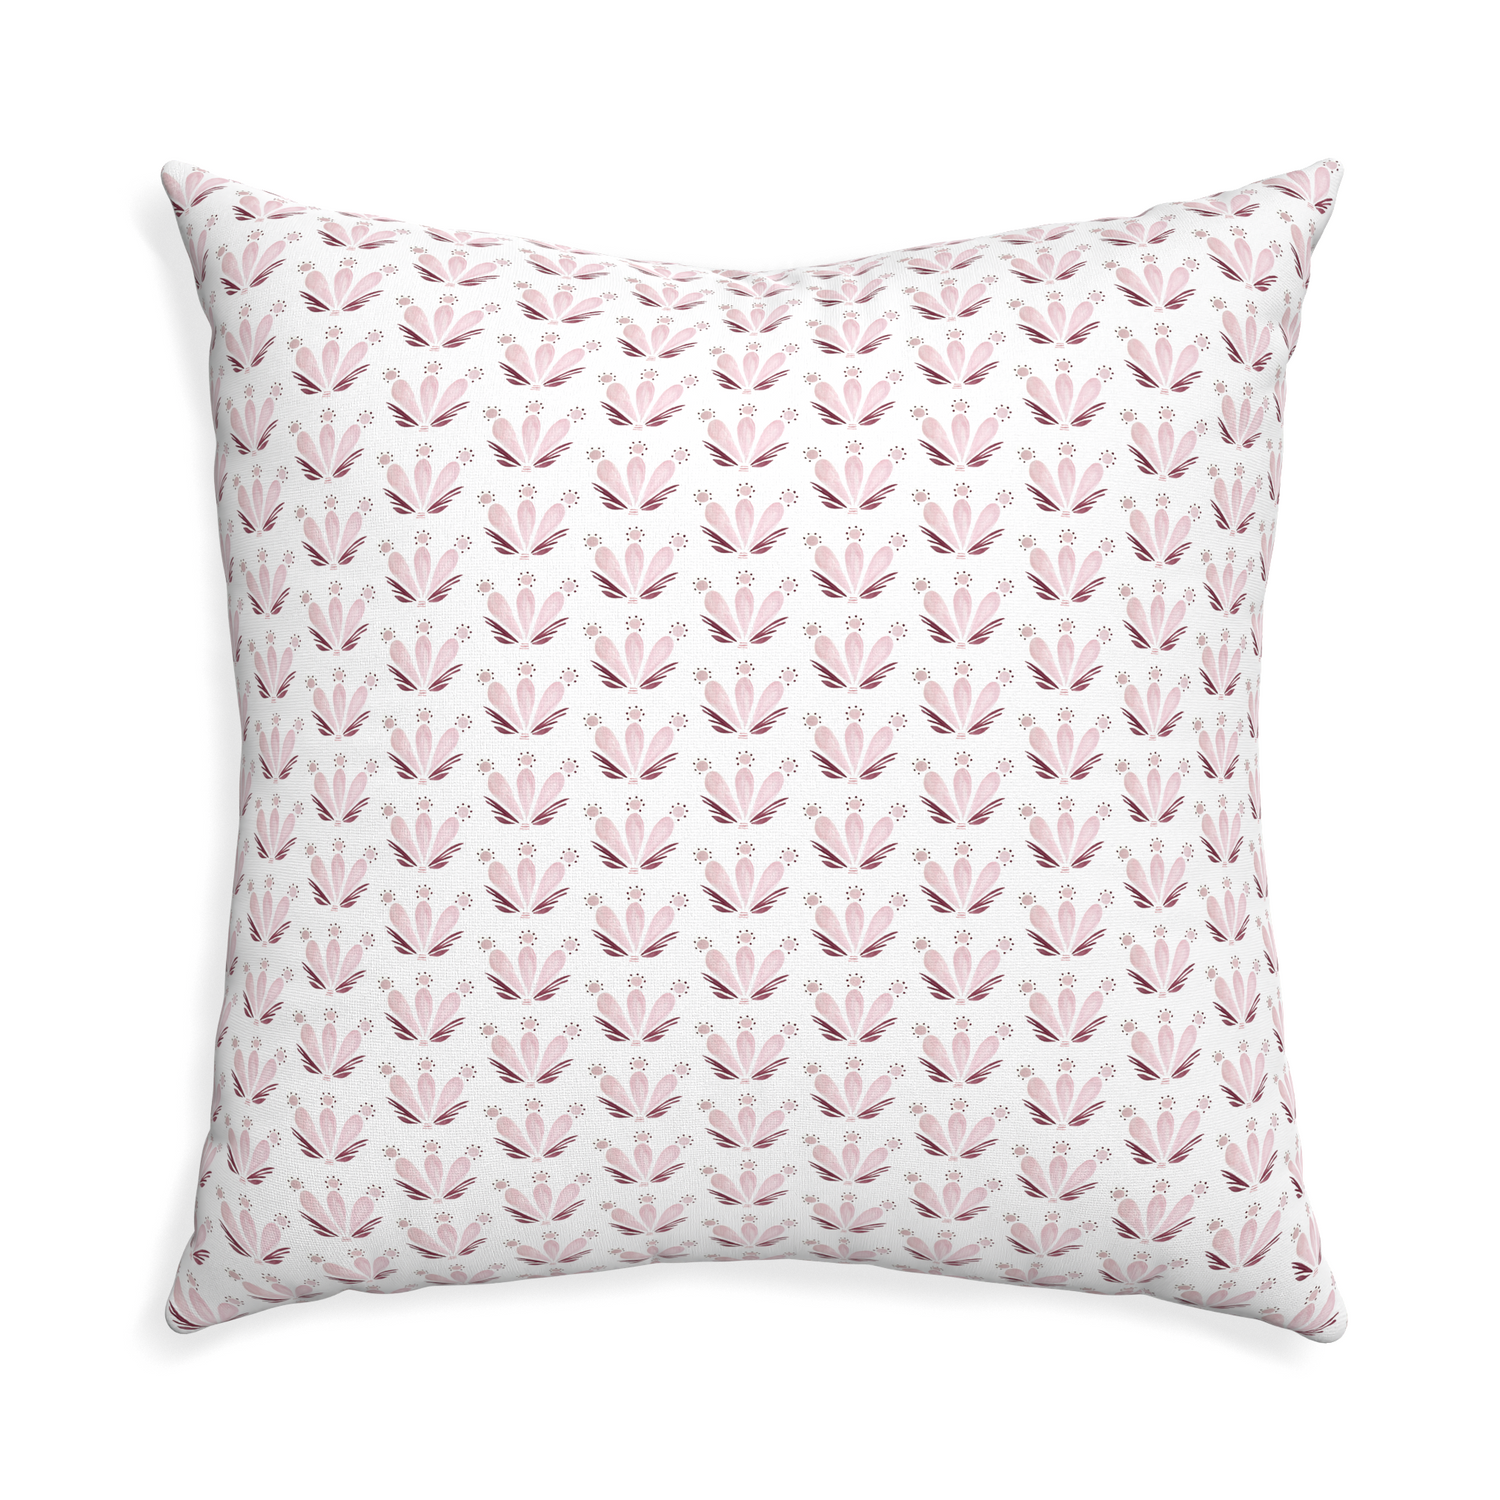 Euro-sham serena pink custom pink & burgundy drop repeat floralpillow with none on white background